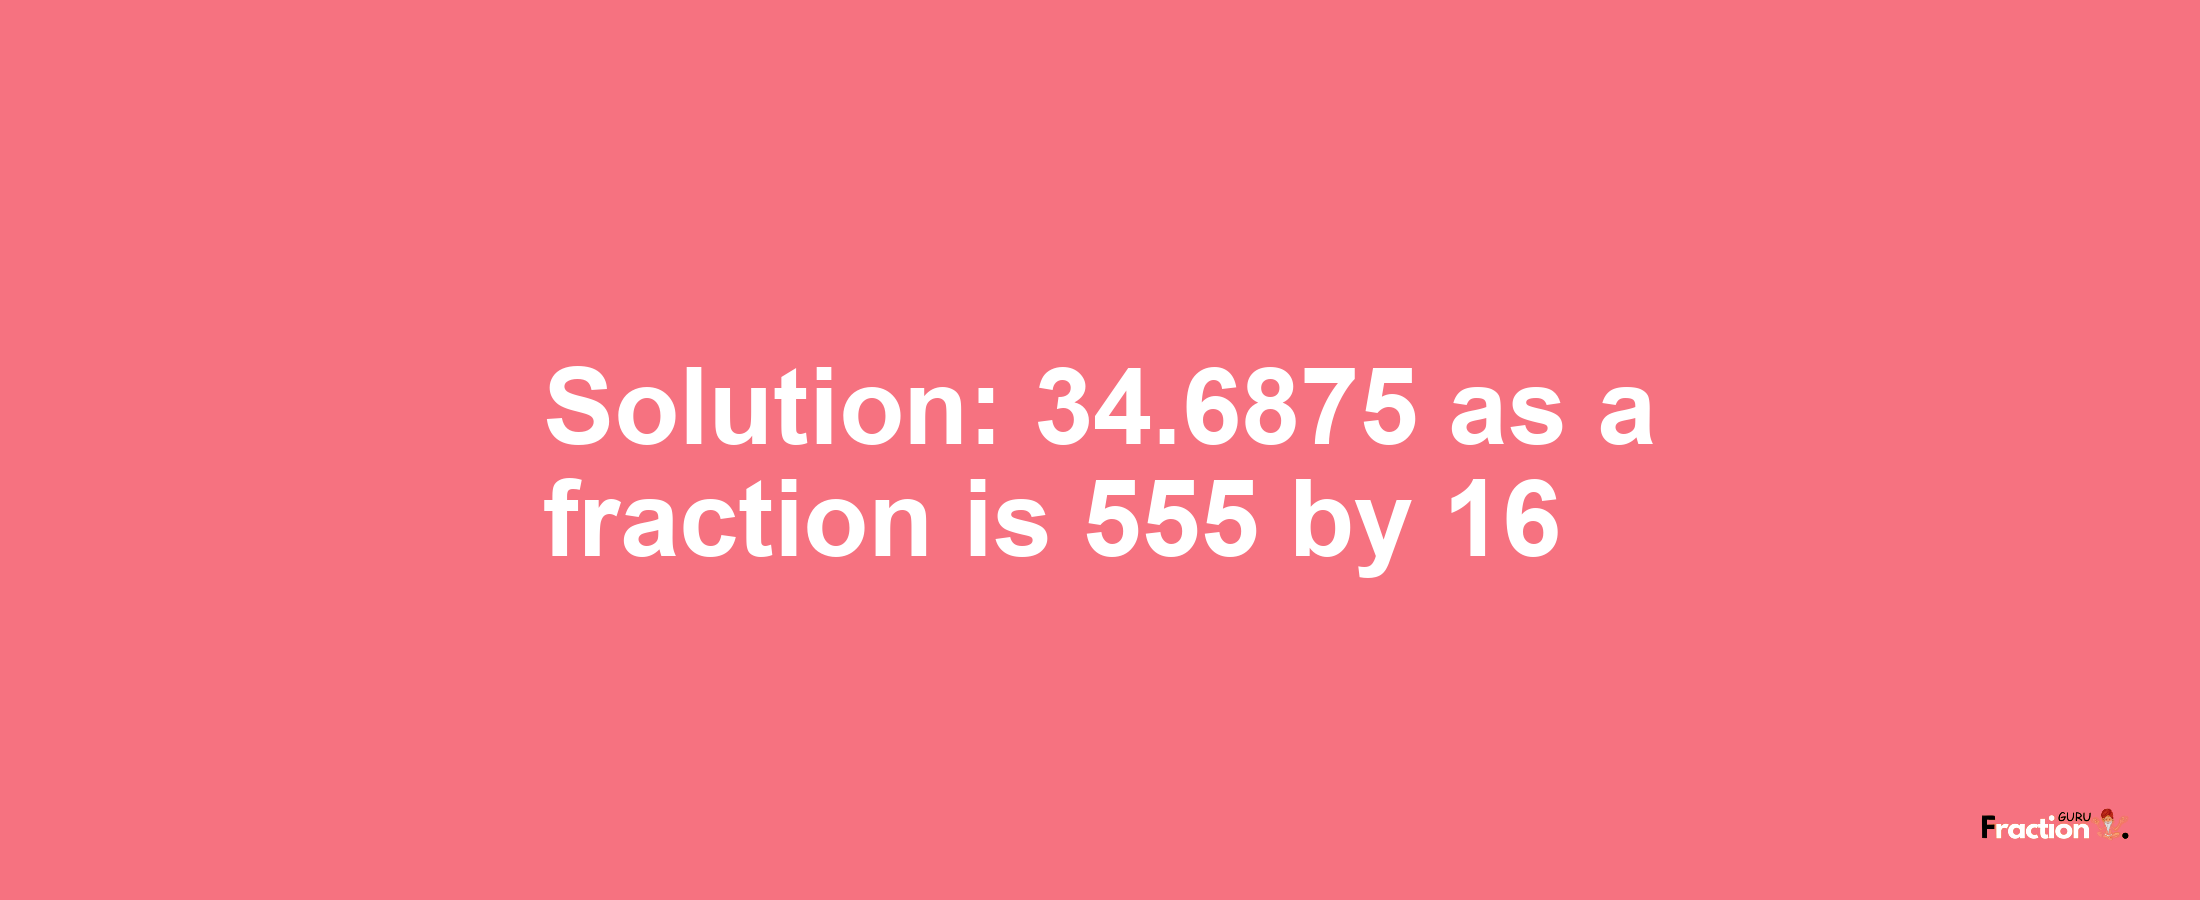 Solution:34.6875 as a fraction is 555/16